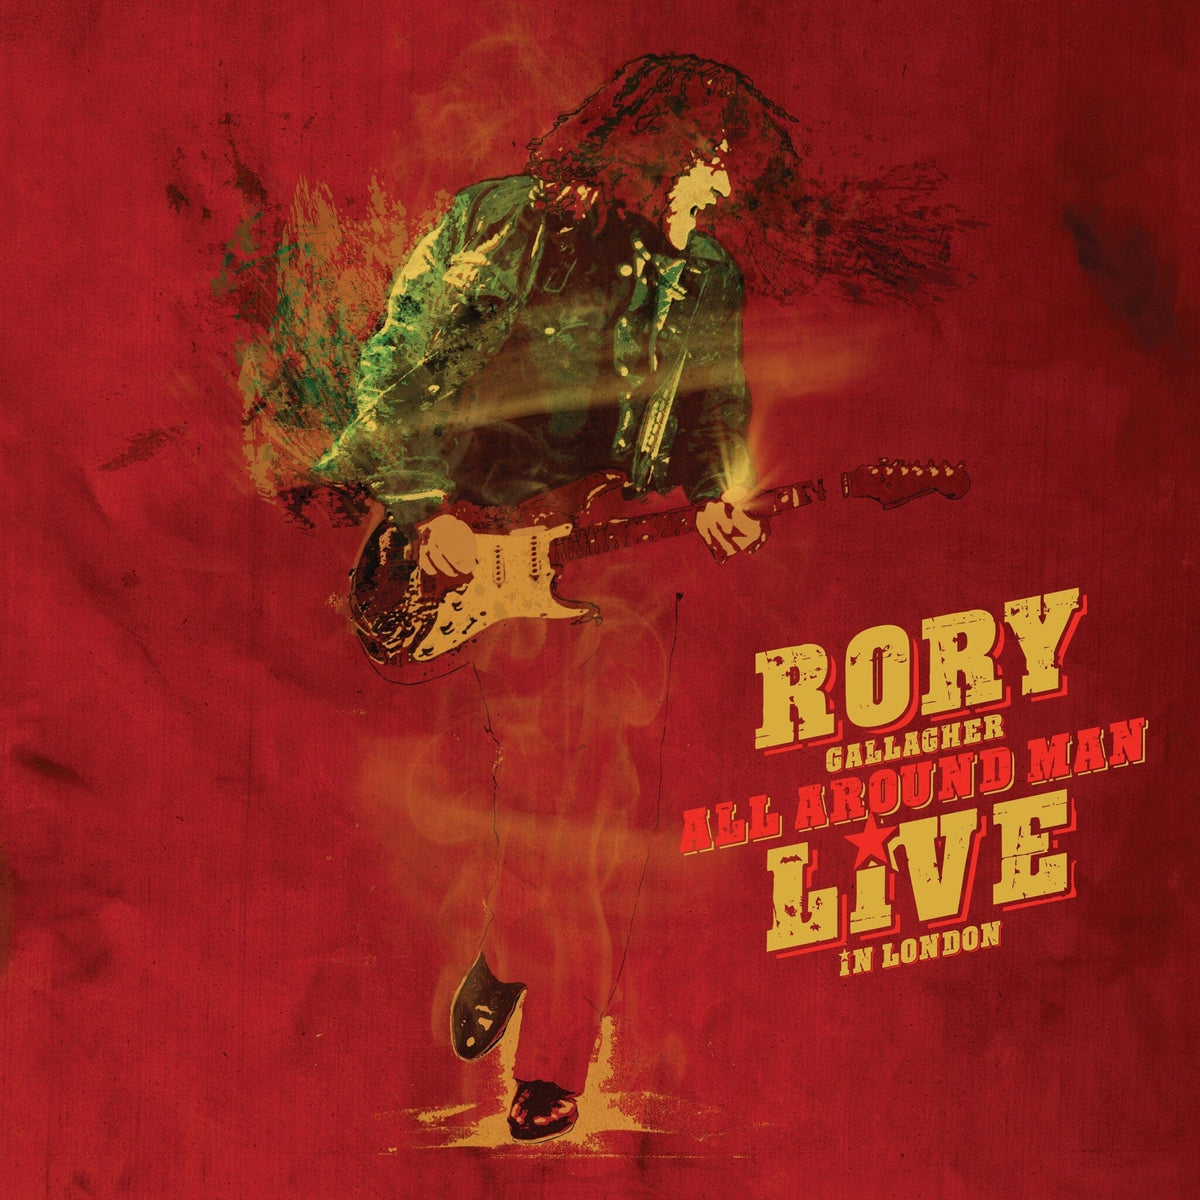 All Around Man: Live In London - Rory Gallagher [Vinyl]